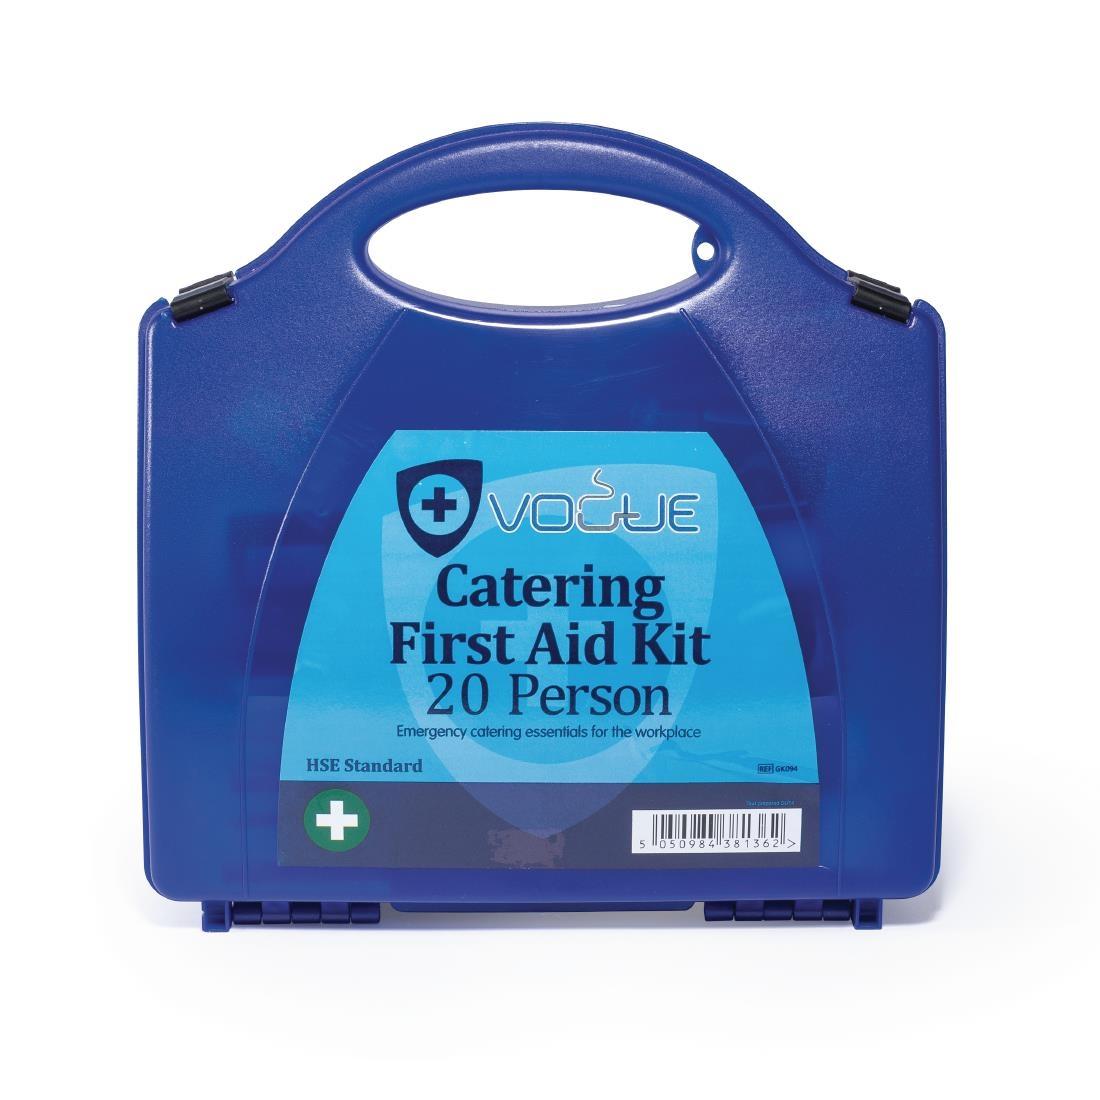 Vogue HSE First Aid Kit Catering 20 person - GK094  - 1